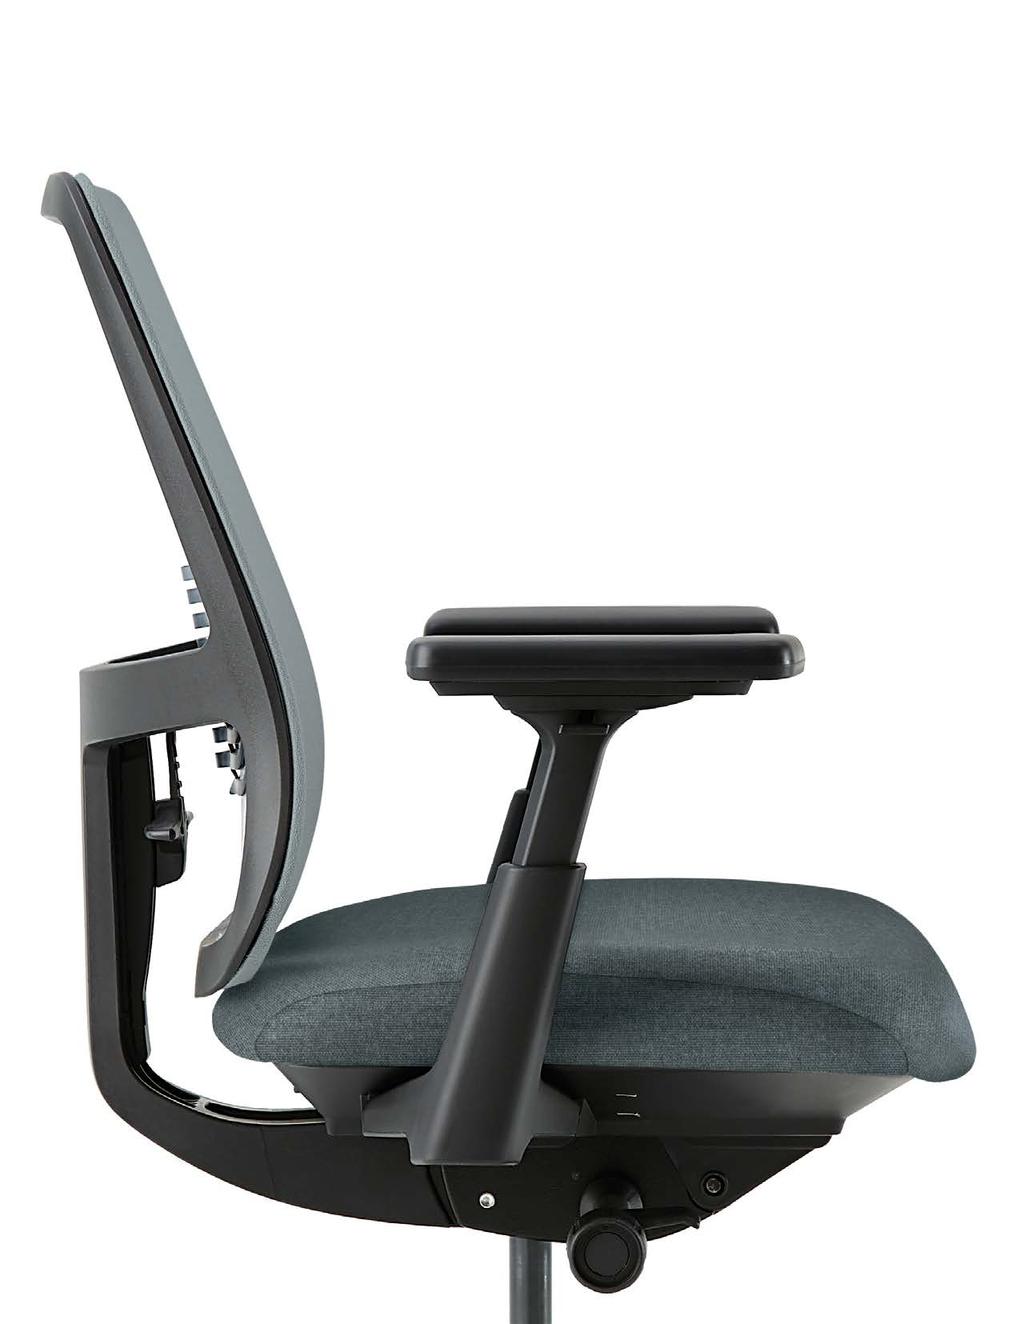 DAY-LONG COMFORT With Lively, you benefit from Haworth s industry-leading research in ergonomics and human performance.